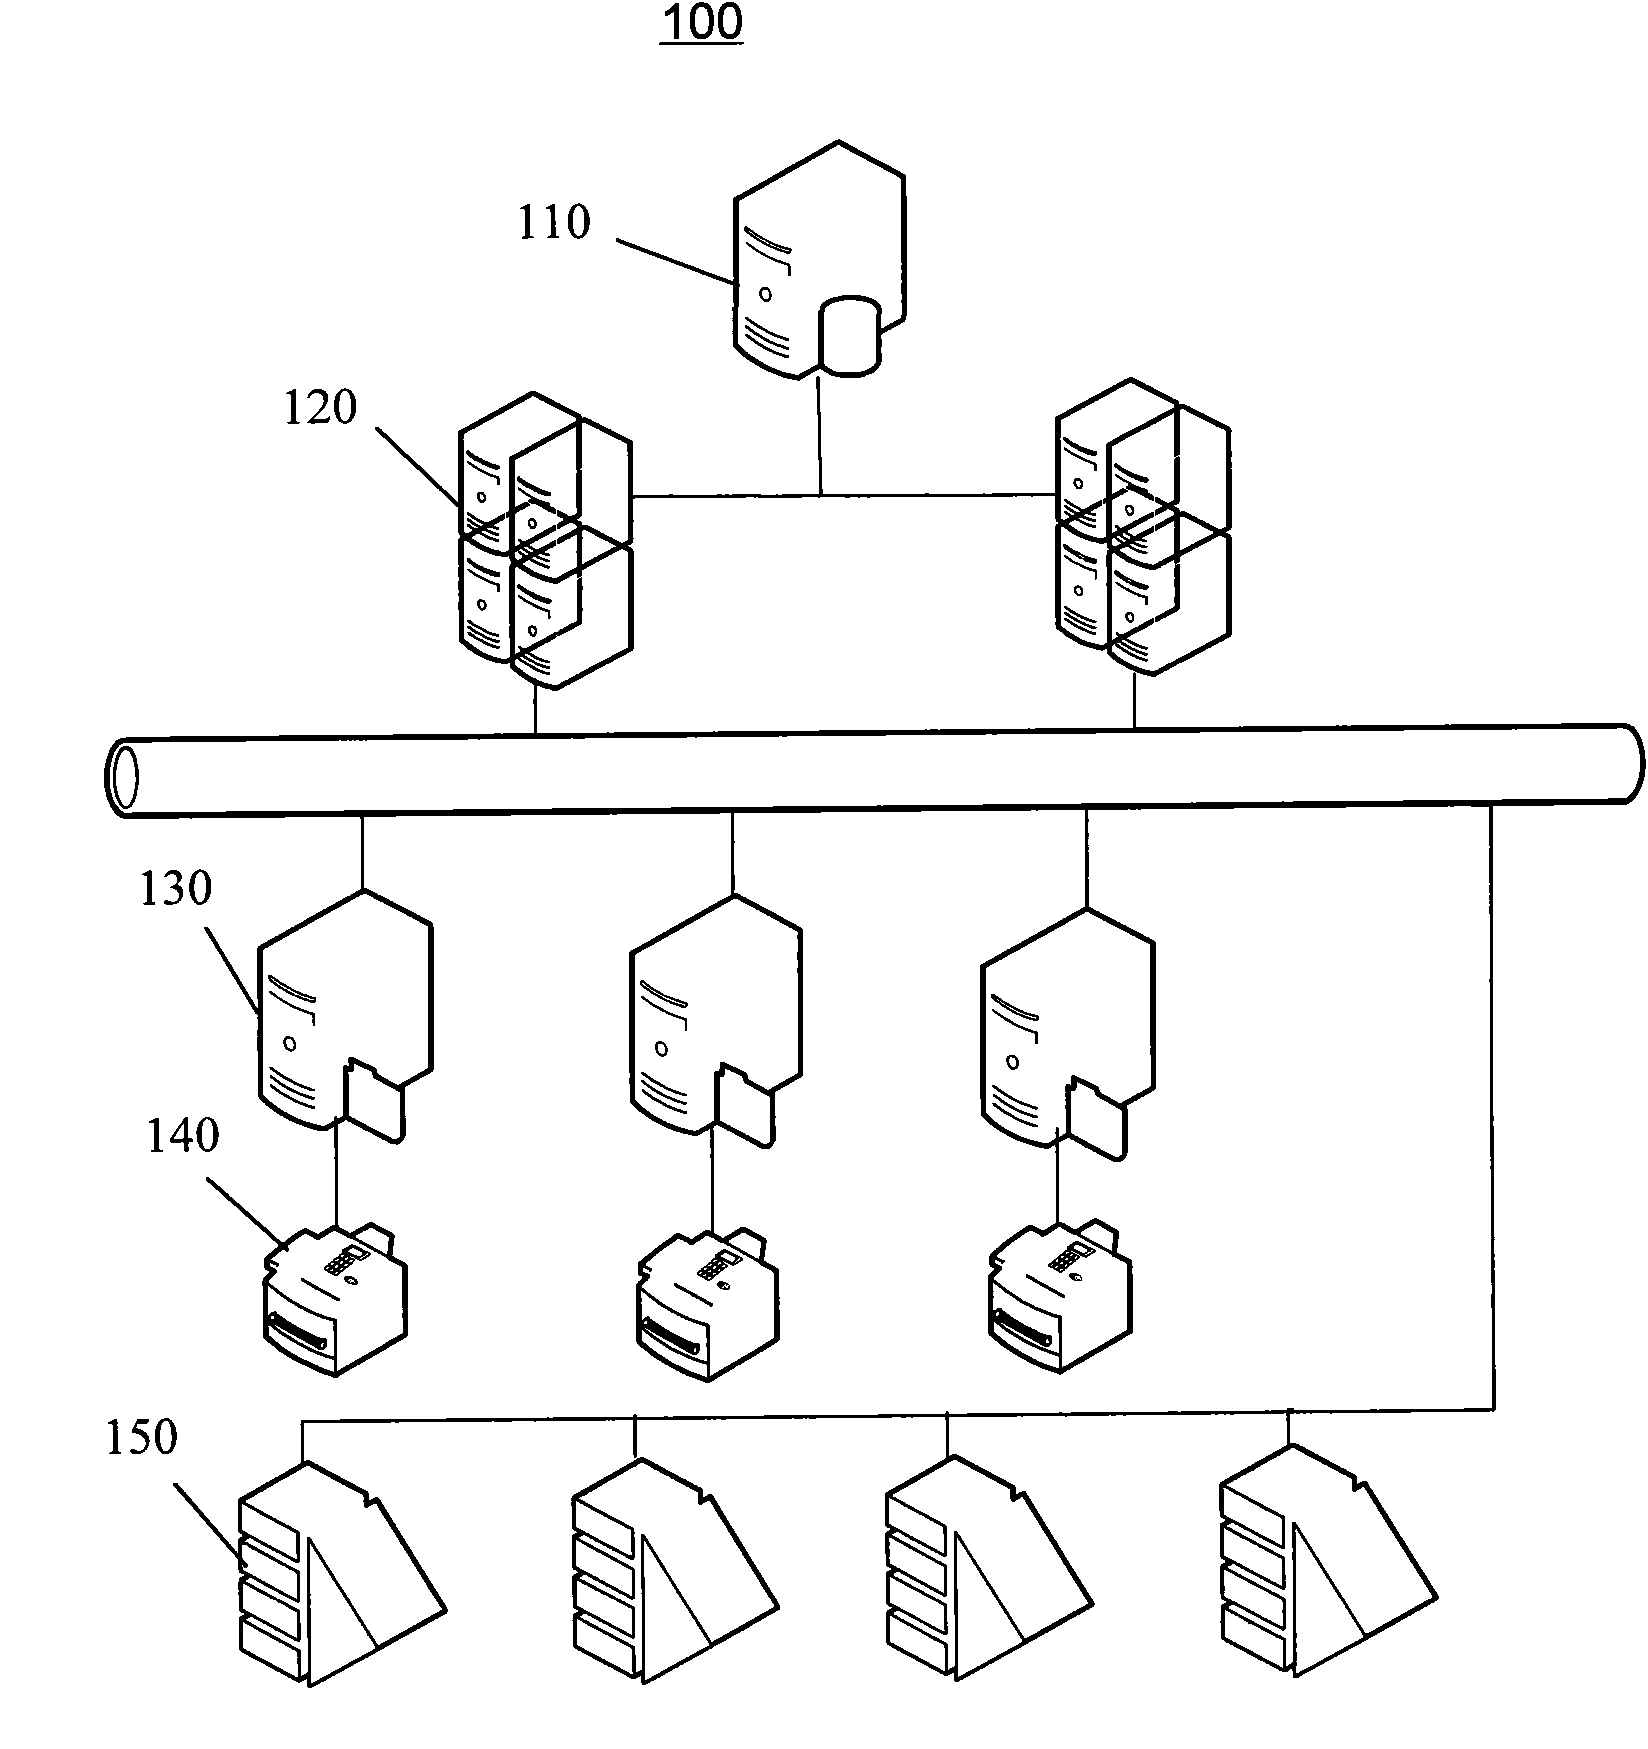 Distributed data backup and disaster tolerance system and method